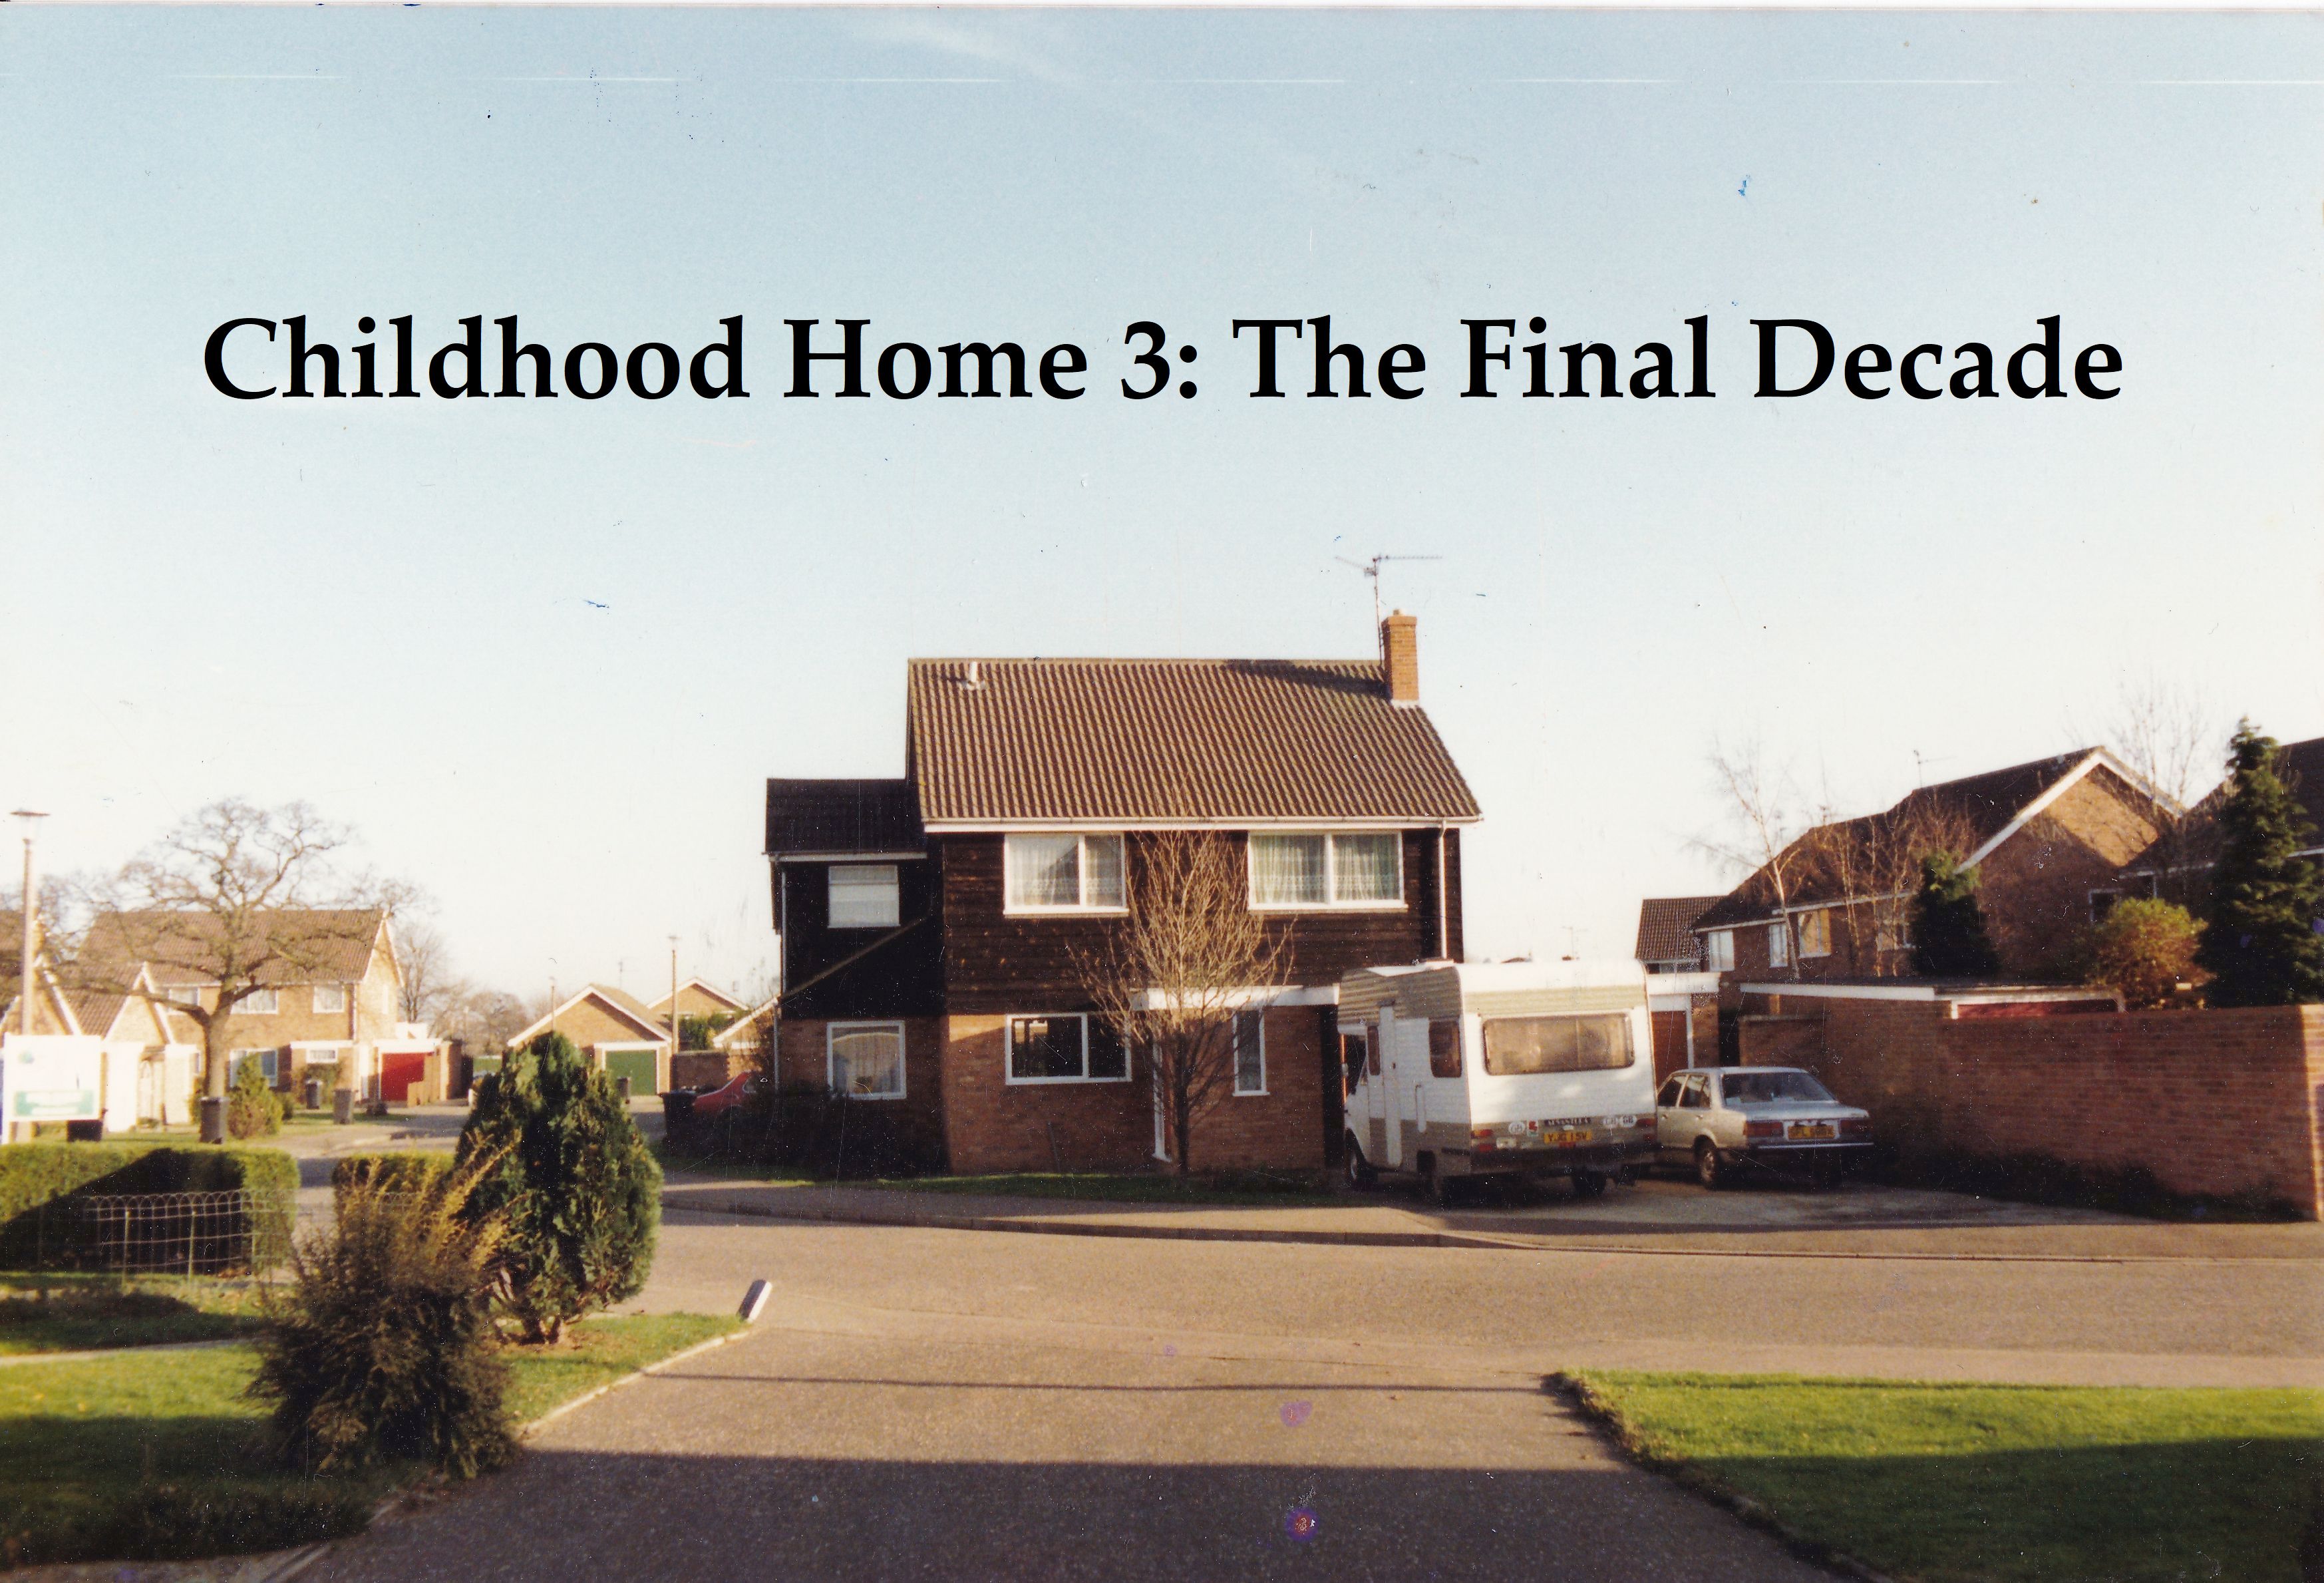 Childhood Home 3: The Final Decade